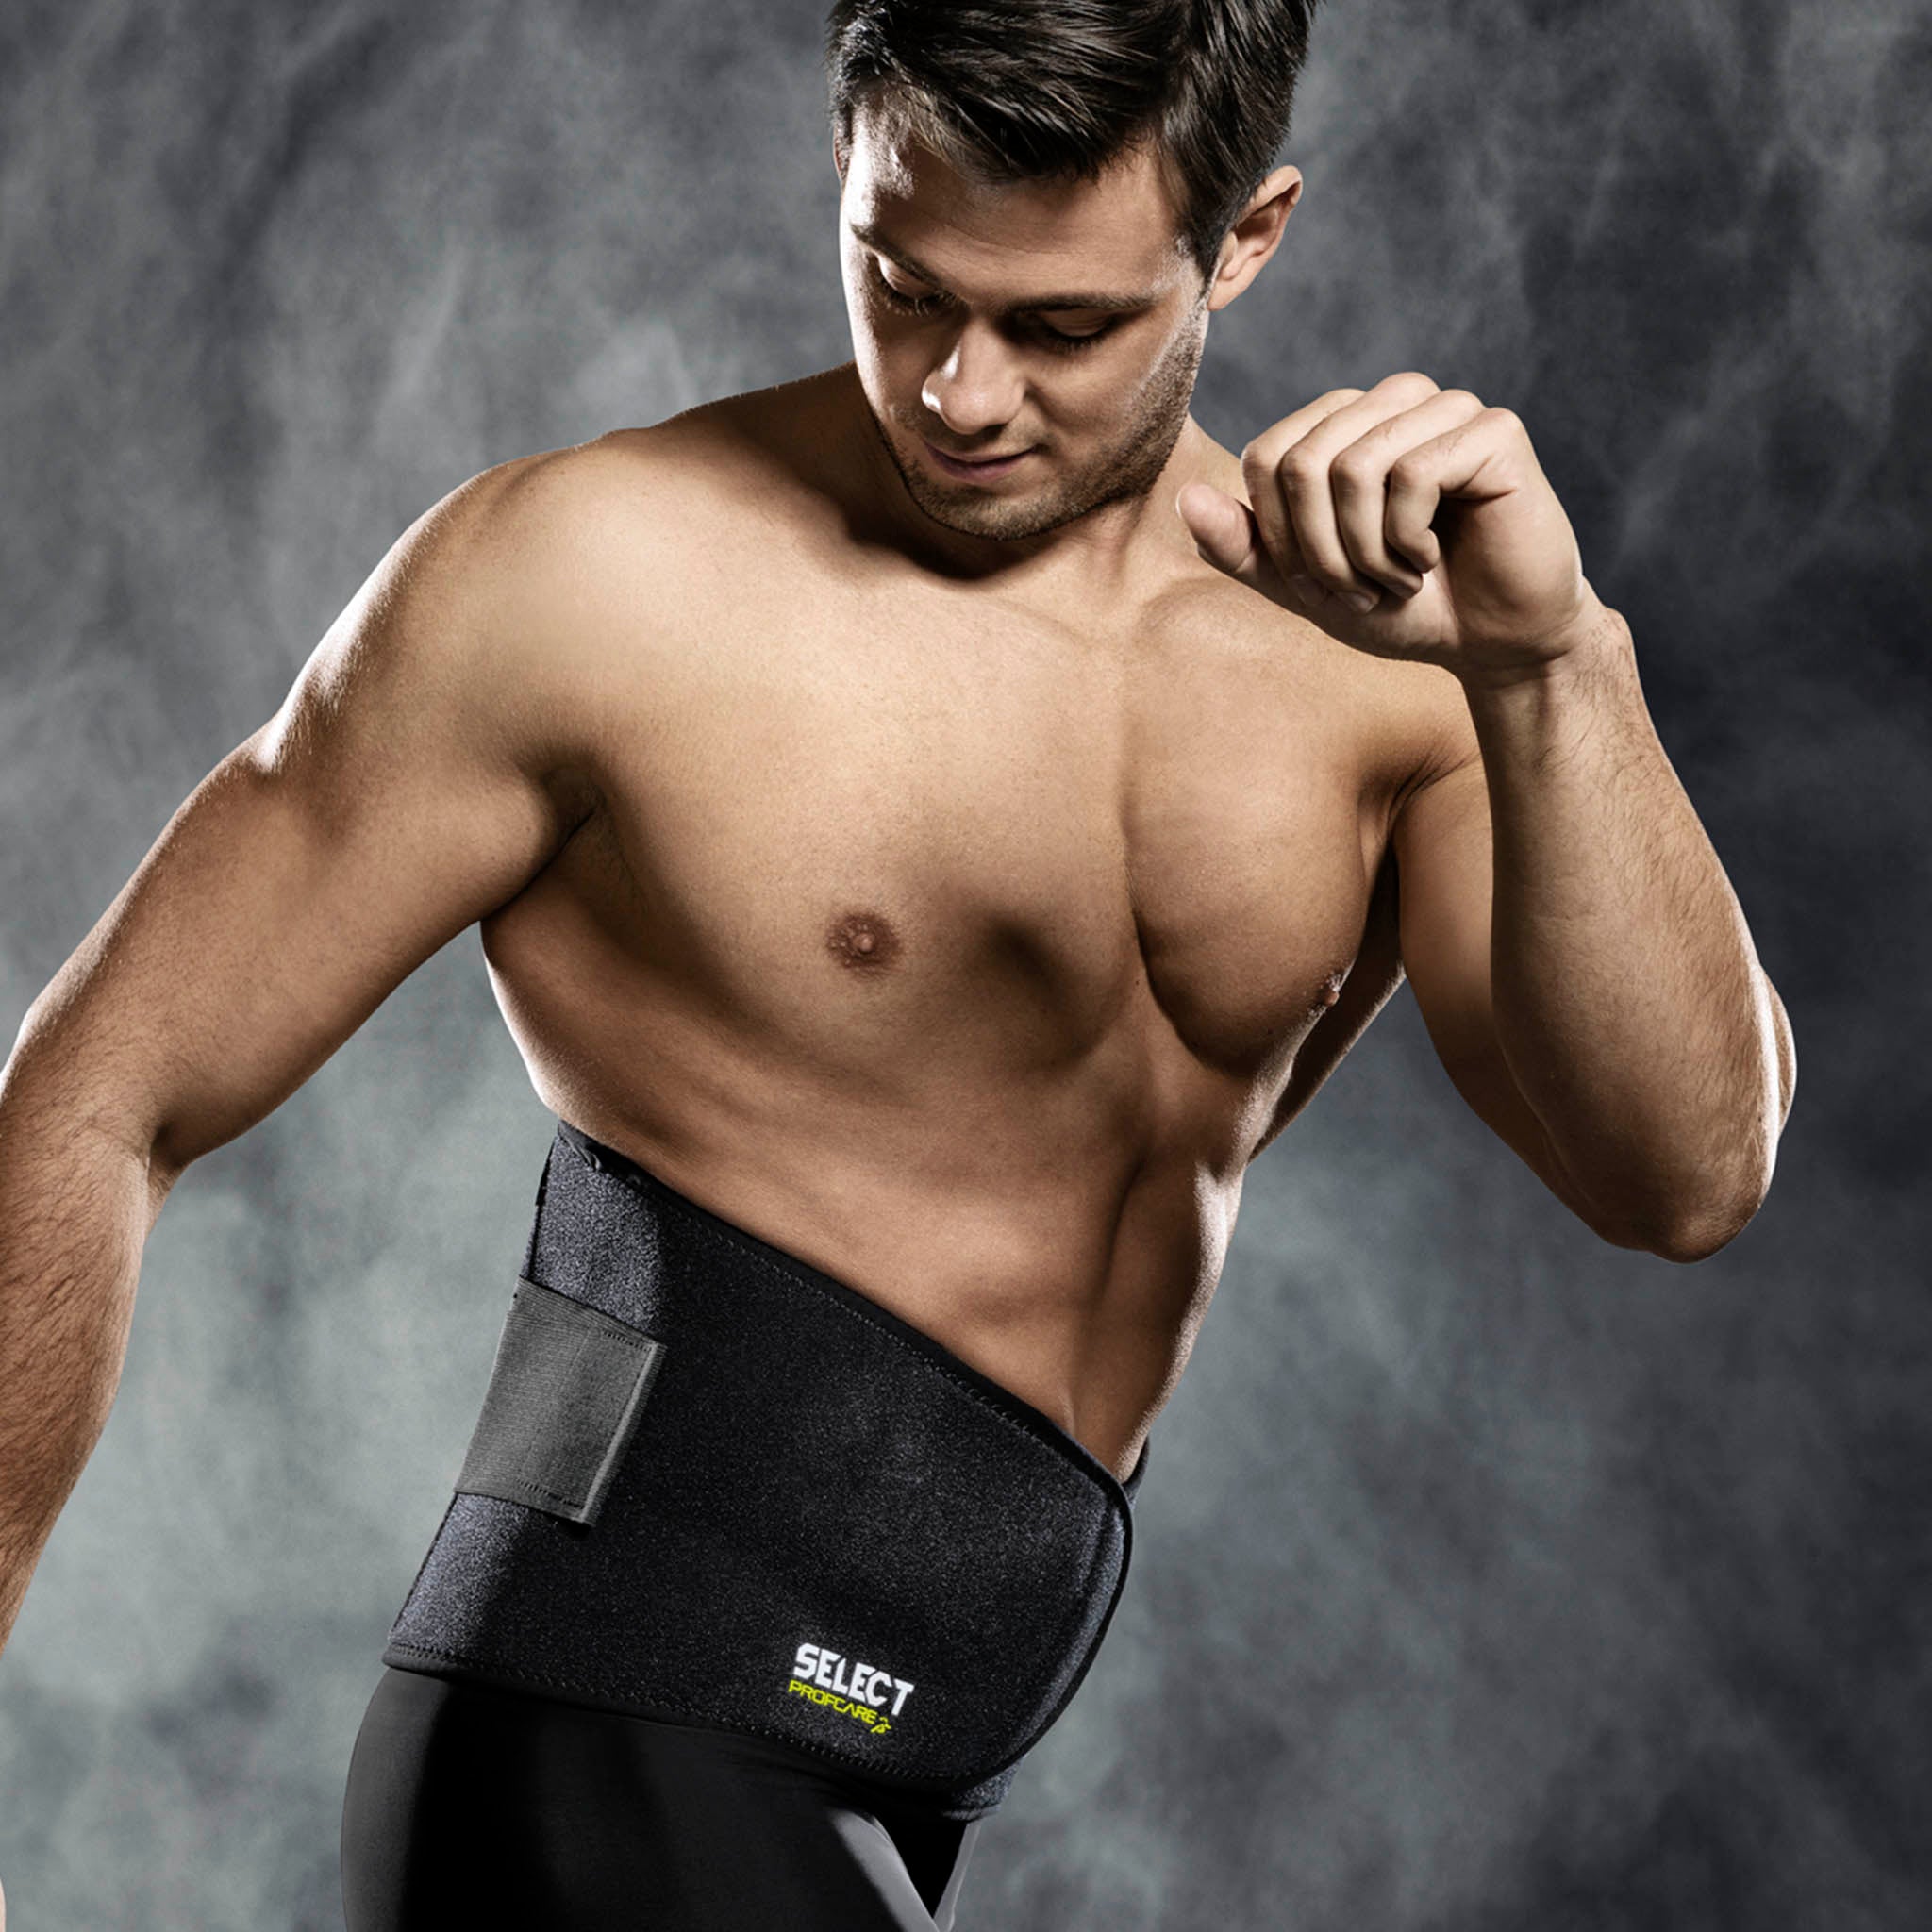 Neoprene Abdominal Belt 8 Wide With Extra Support, Size: S, M, L